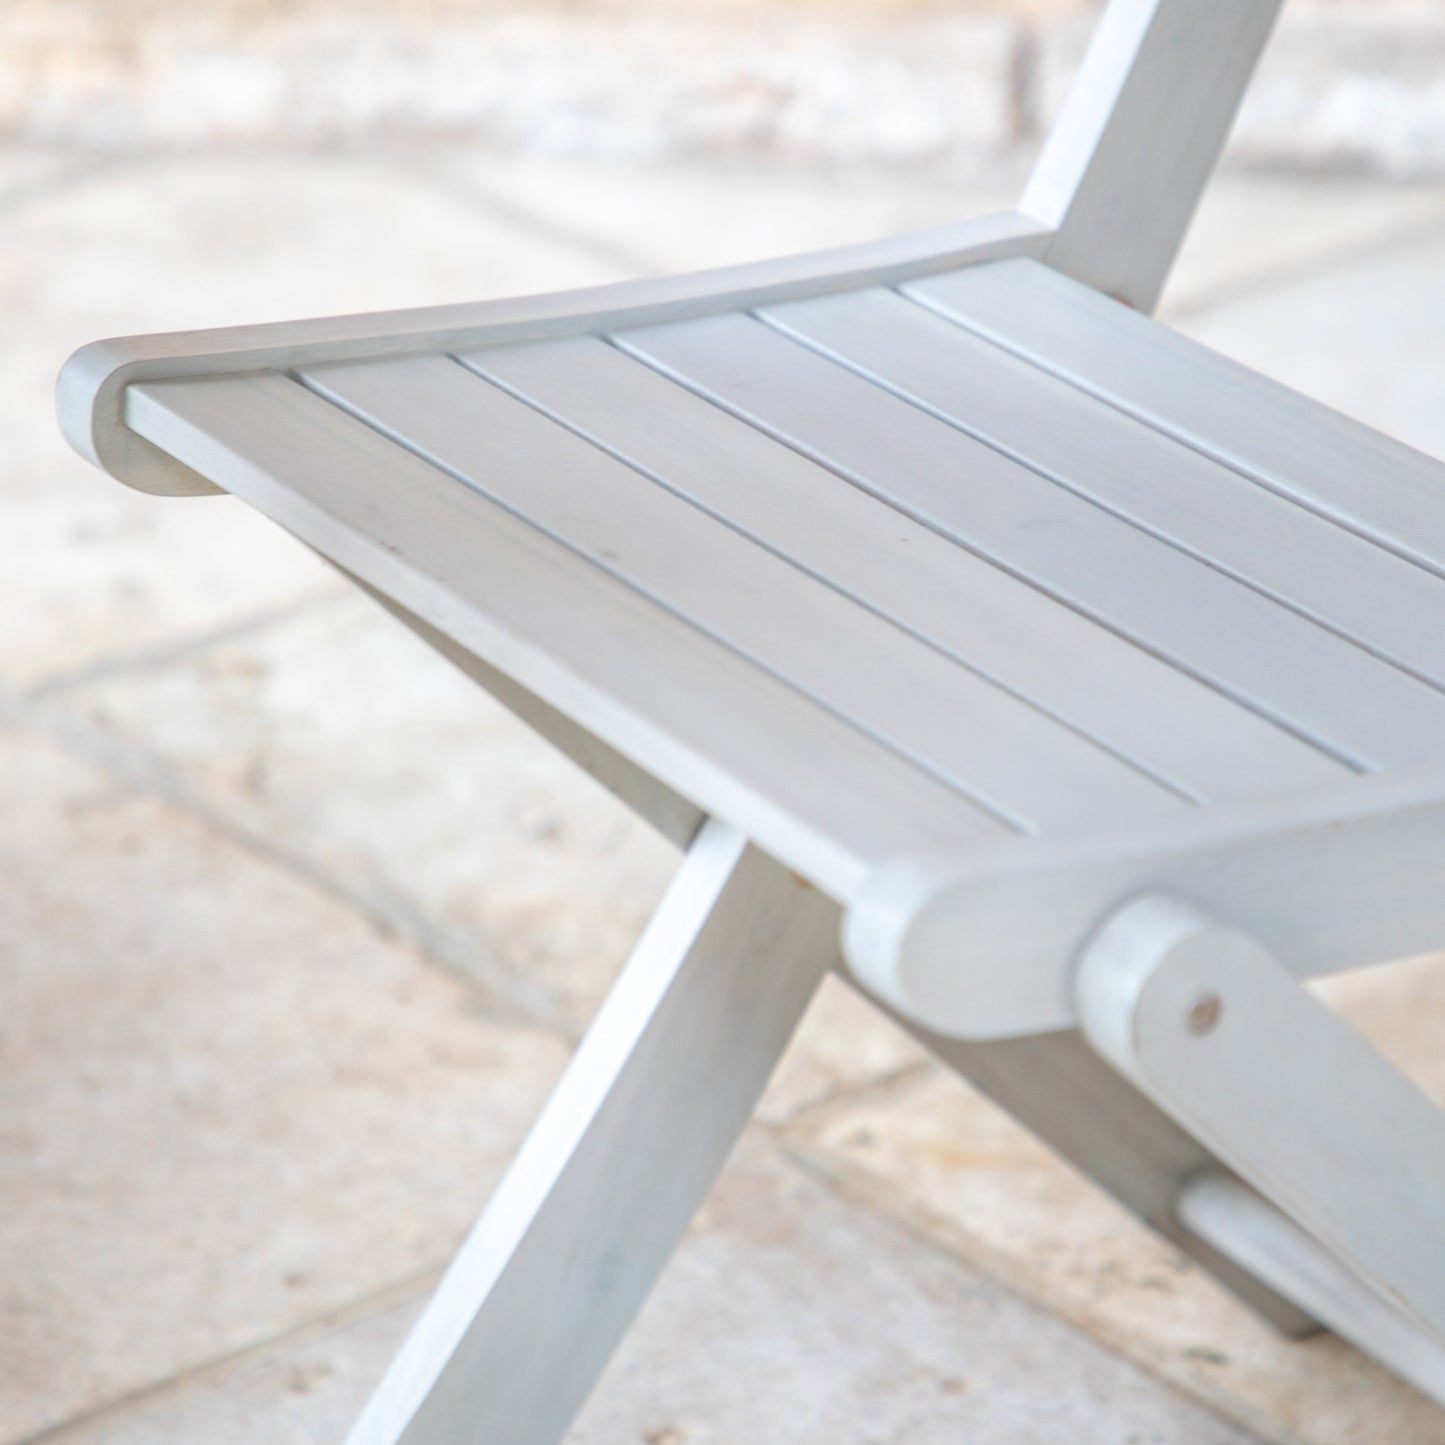 A close up of a Chillington 2 Seater Bistro Set Whitewash chair from Kikiathome.co.uk, perfect for home furniture.